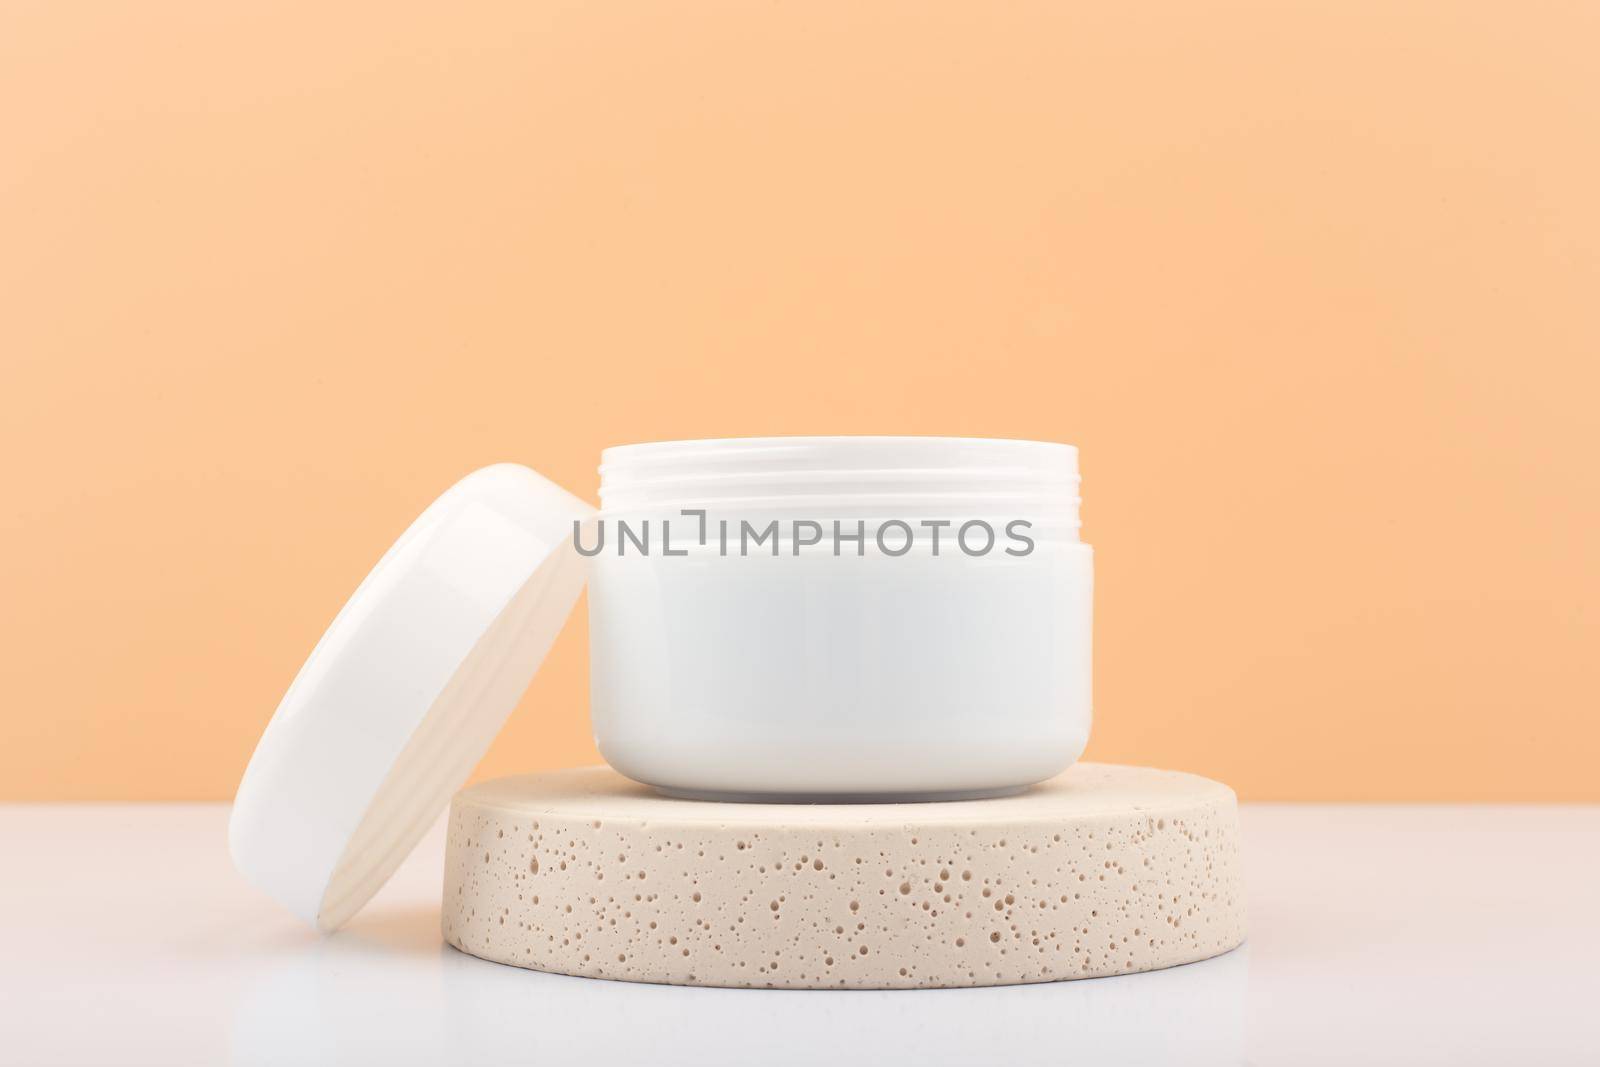 White opened cosmetic jar on beige podium against beige background. Concept of face or hair mask, balm or scrub by Senorina_Irina